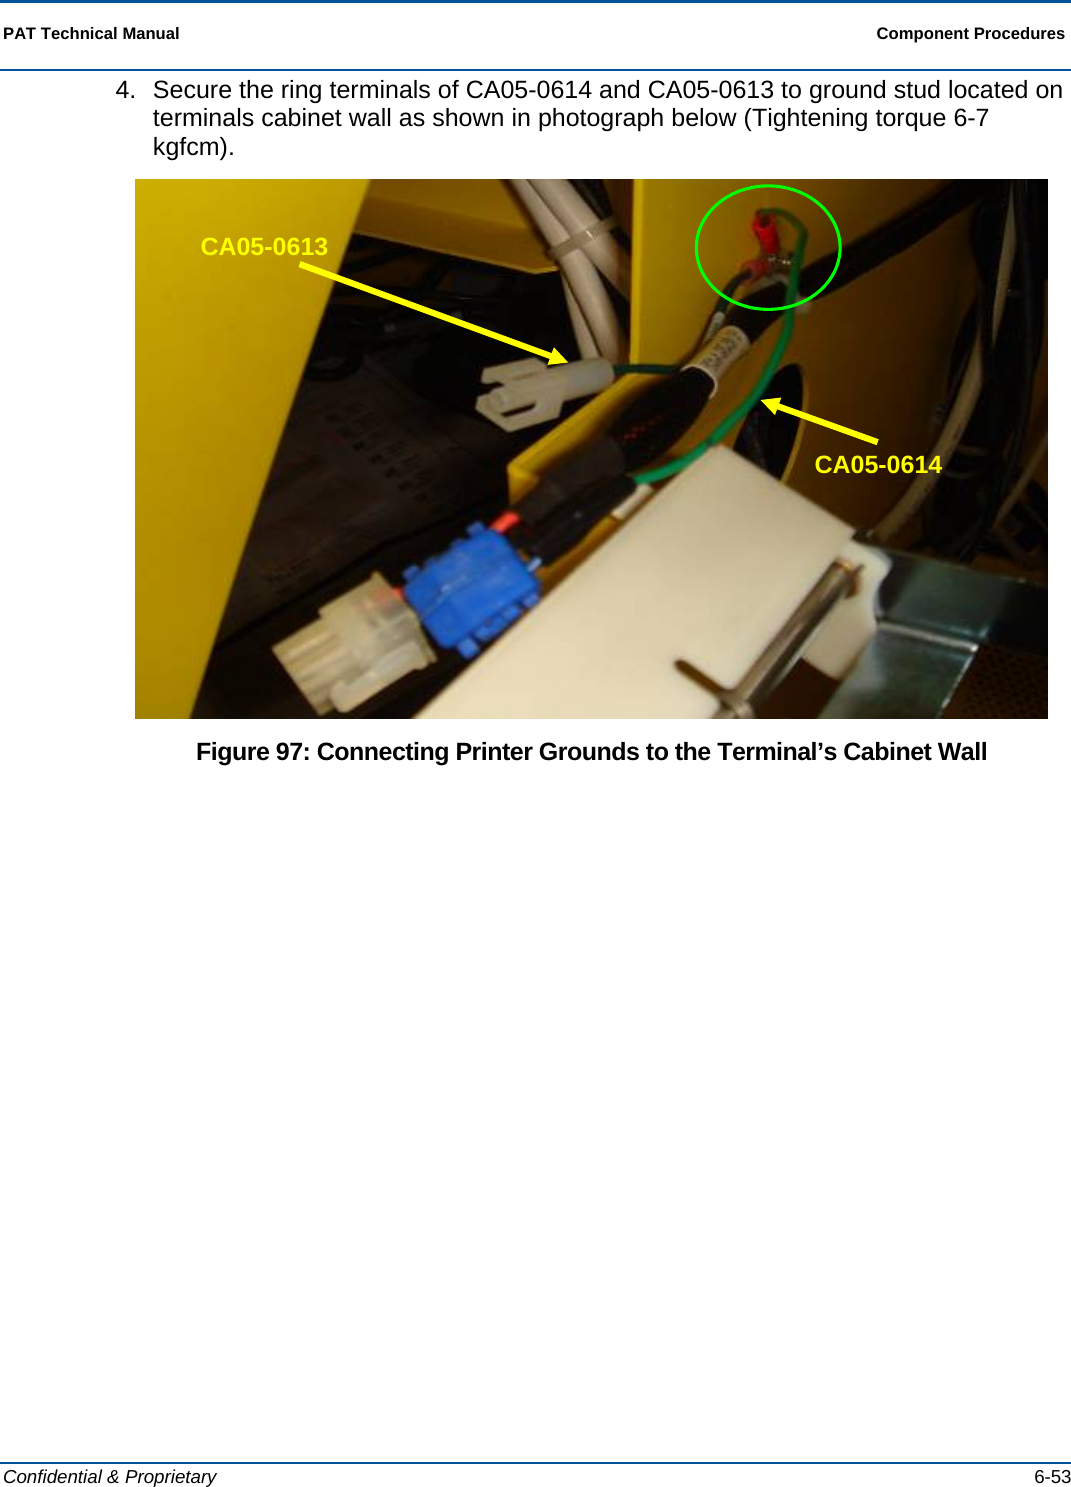  PAT Technical Manual  Component Procedures  Confidential &amp; Proprietary   6-53 4.  Secure the ring terminals of CA05-0614 and CA05-0613 to ground stud located on terminals cabinet wall as shown in photograph below (Tightening torque 6-7 kgfcm).  Figure 97: Connecting Printer Grounds to the Terminal’s Cabinet Wall CA05-0613 CA05-0614 